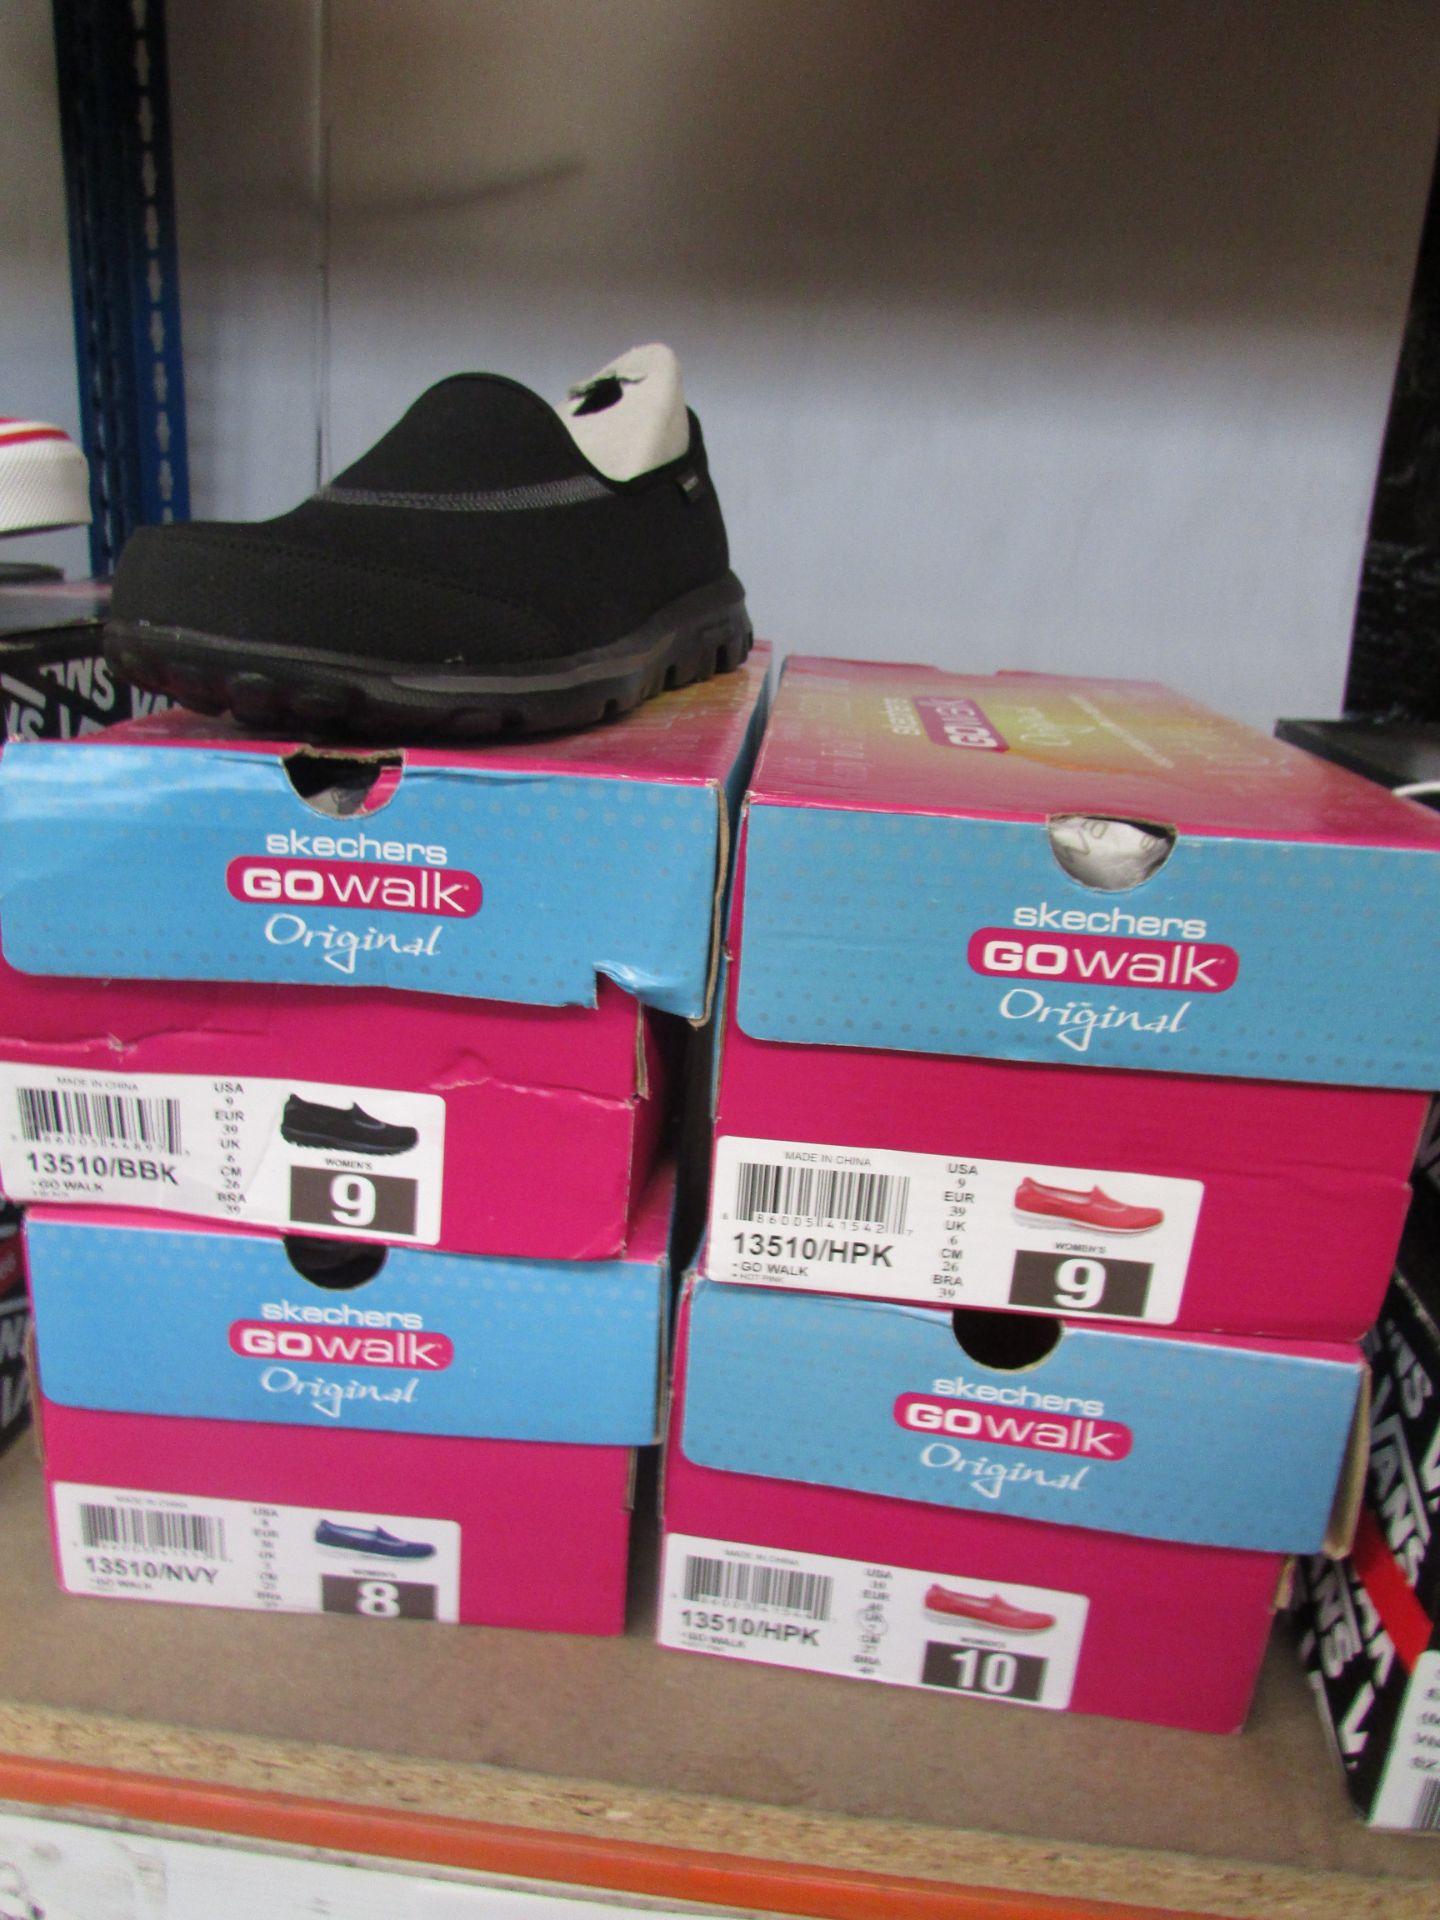 4X PAIRS OF SKETCHERS GO WALK LADIES SHOES IN SIZES 5,6,7